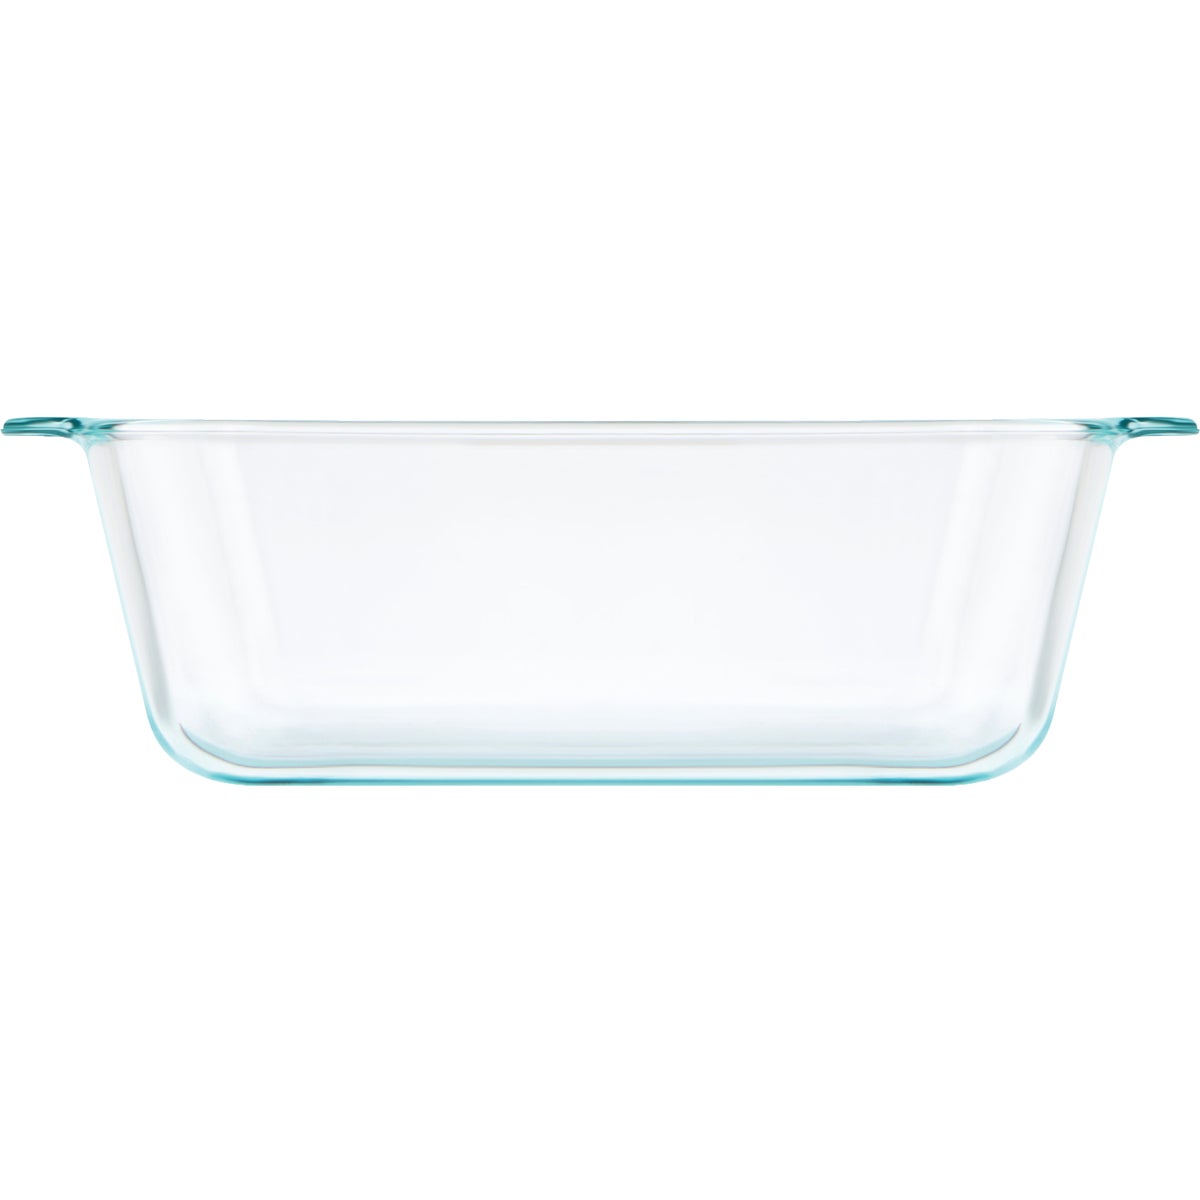 Item 605389, Deep baking dish is constructed of durable high-quality tempered glass for 